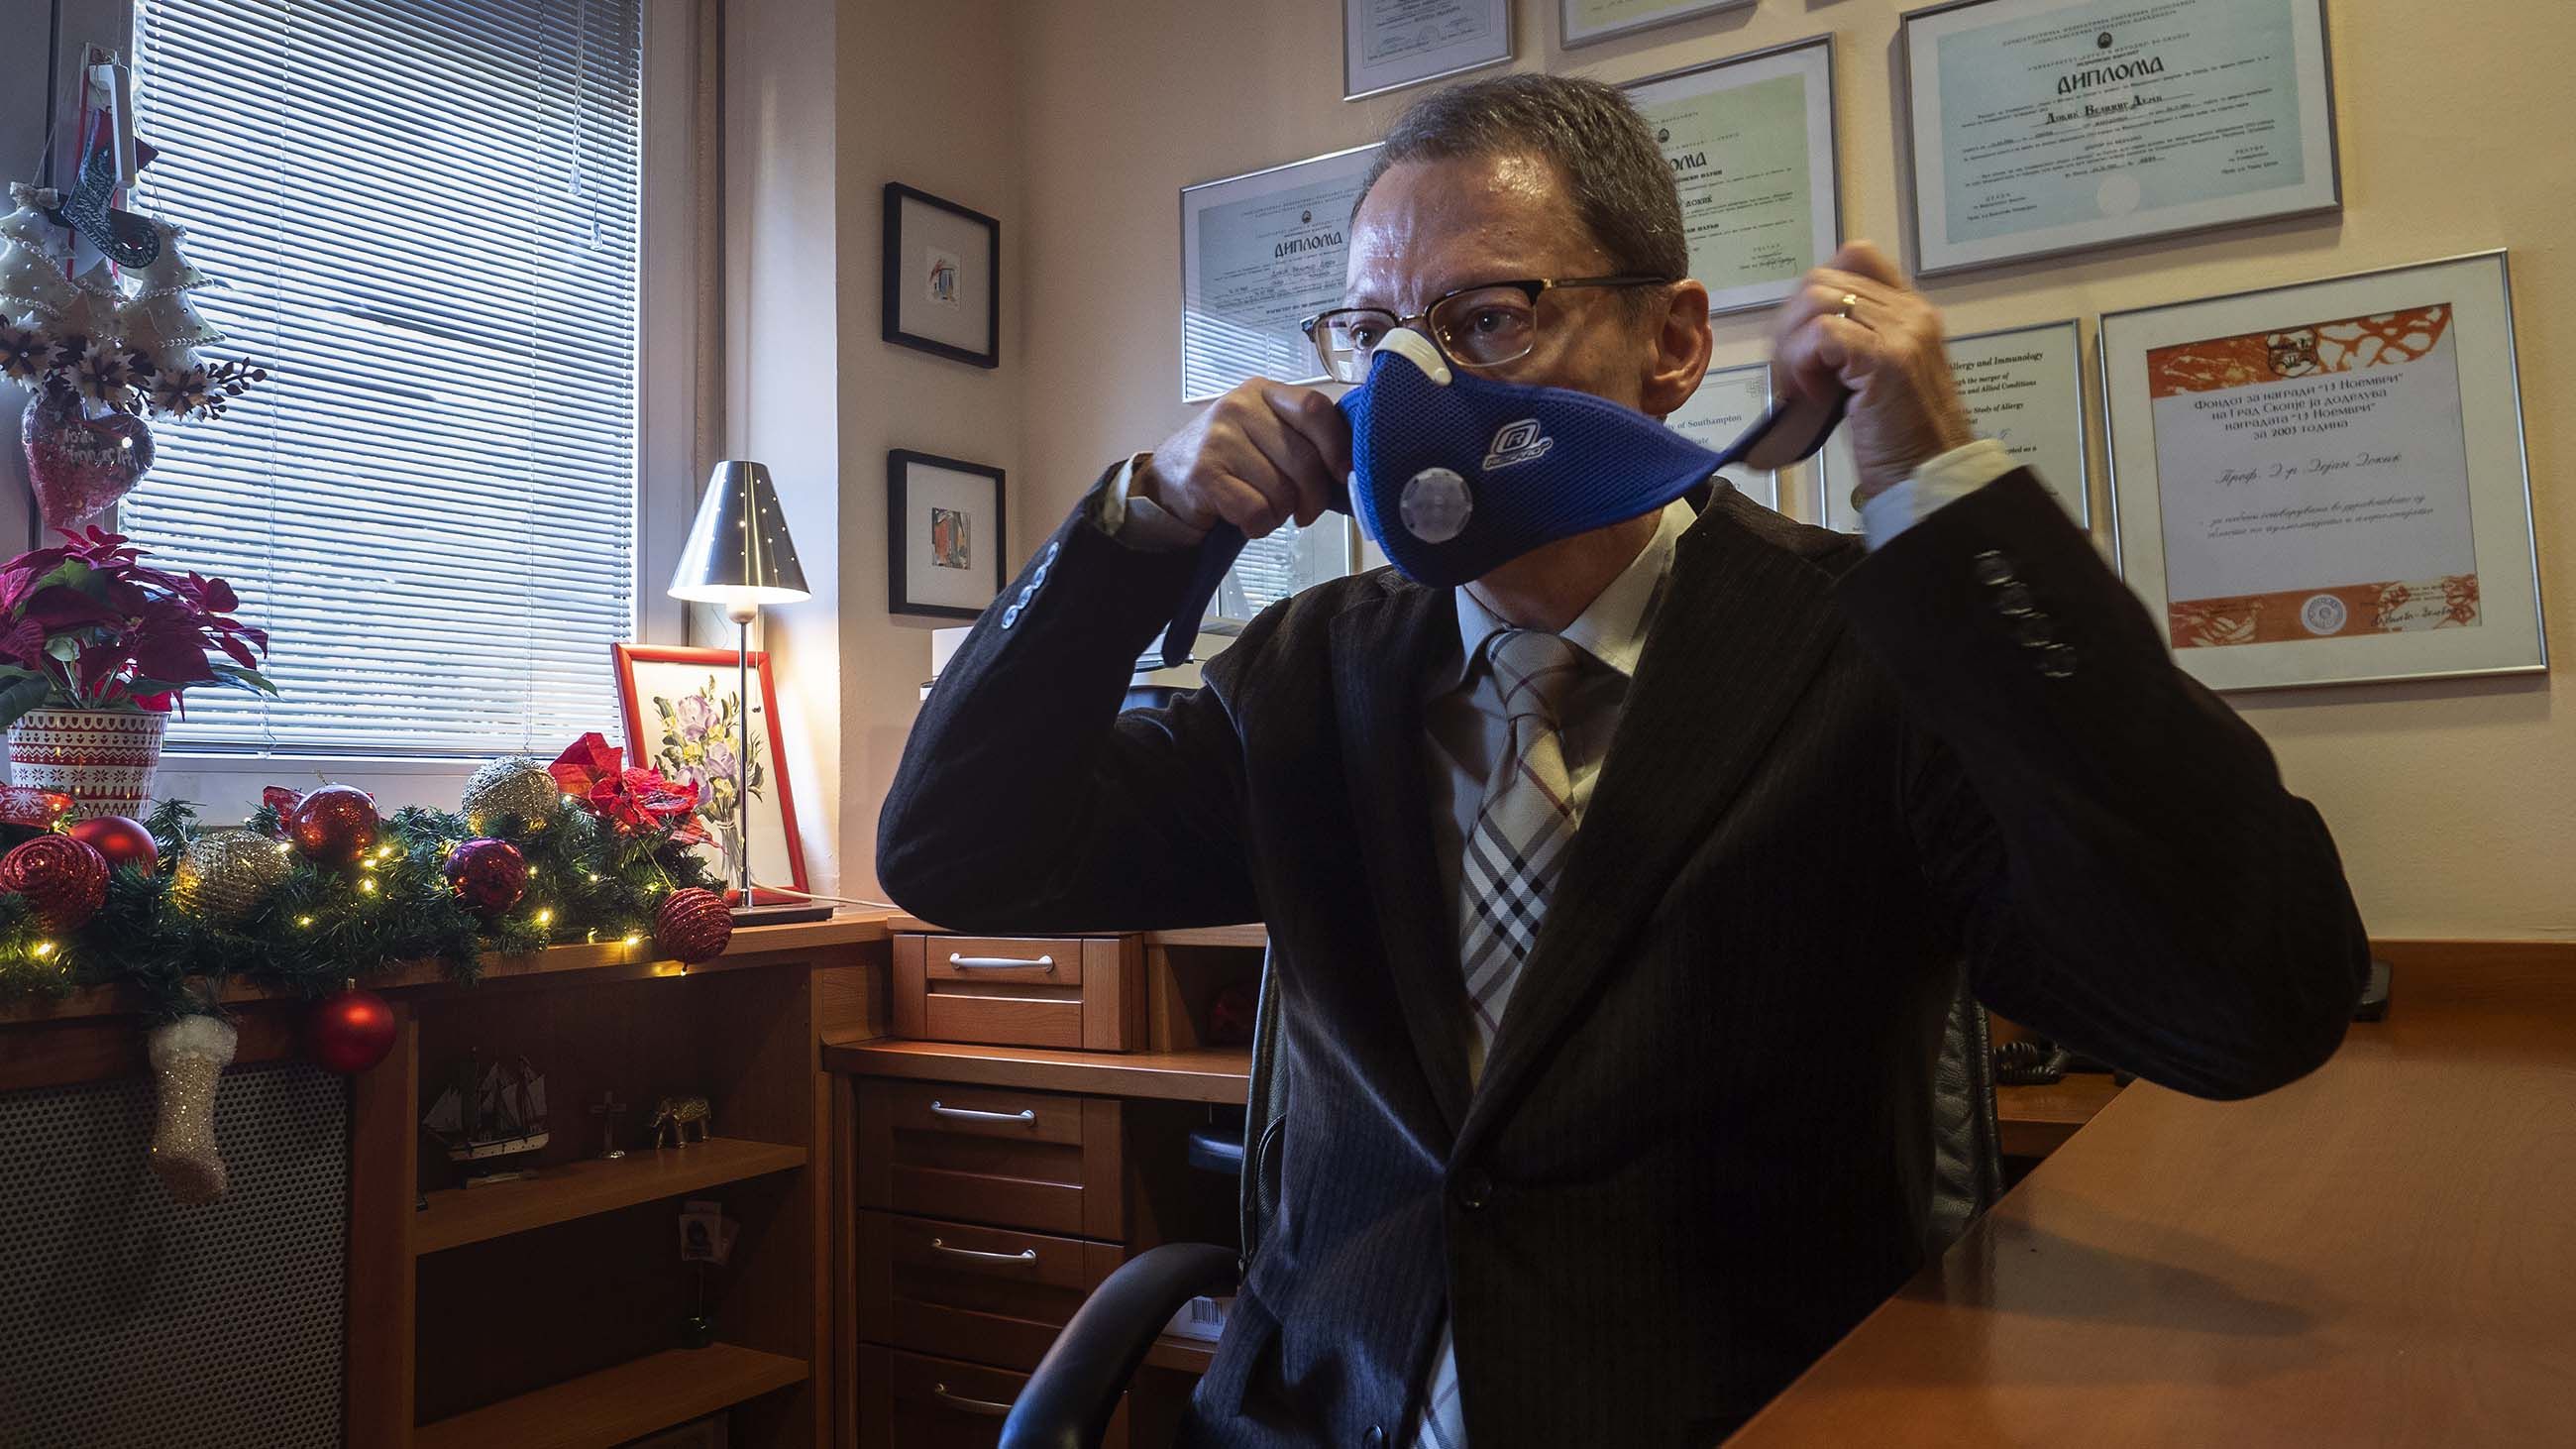 Dr. Dejan Dokic is the director of the University Clinic of Pulmonology and Allergy in Skopje. Here he demonstrates a HEPA mask, which he recommends to his patients — and sometimes uses himself when pollution is bad. Image by Larry C. Price. Macedonia, 2018.